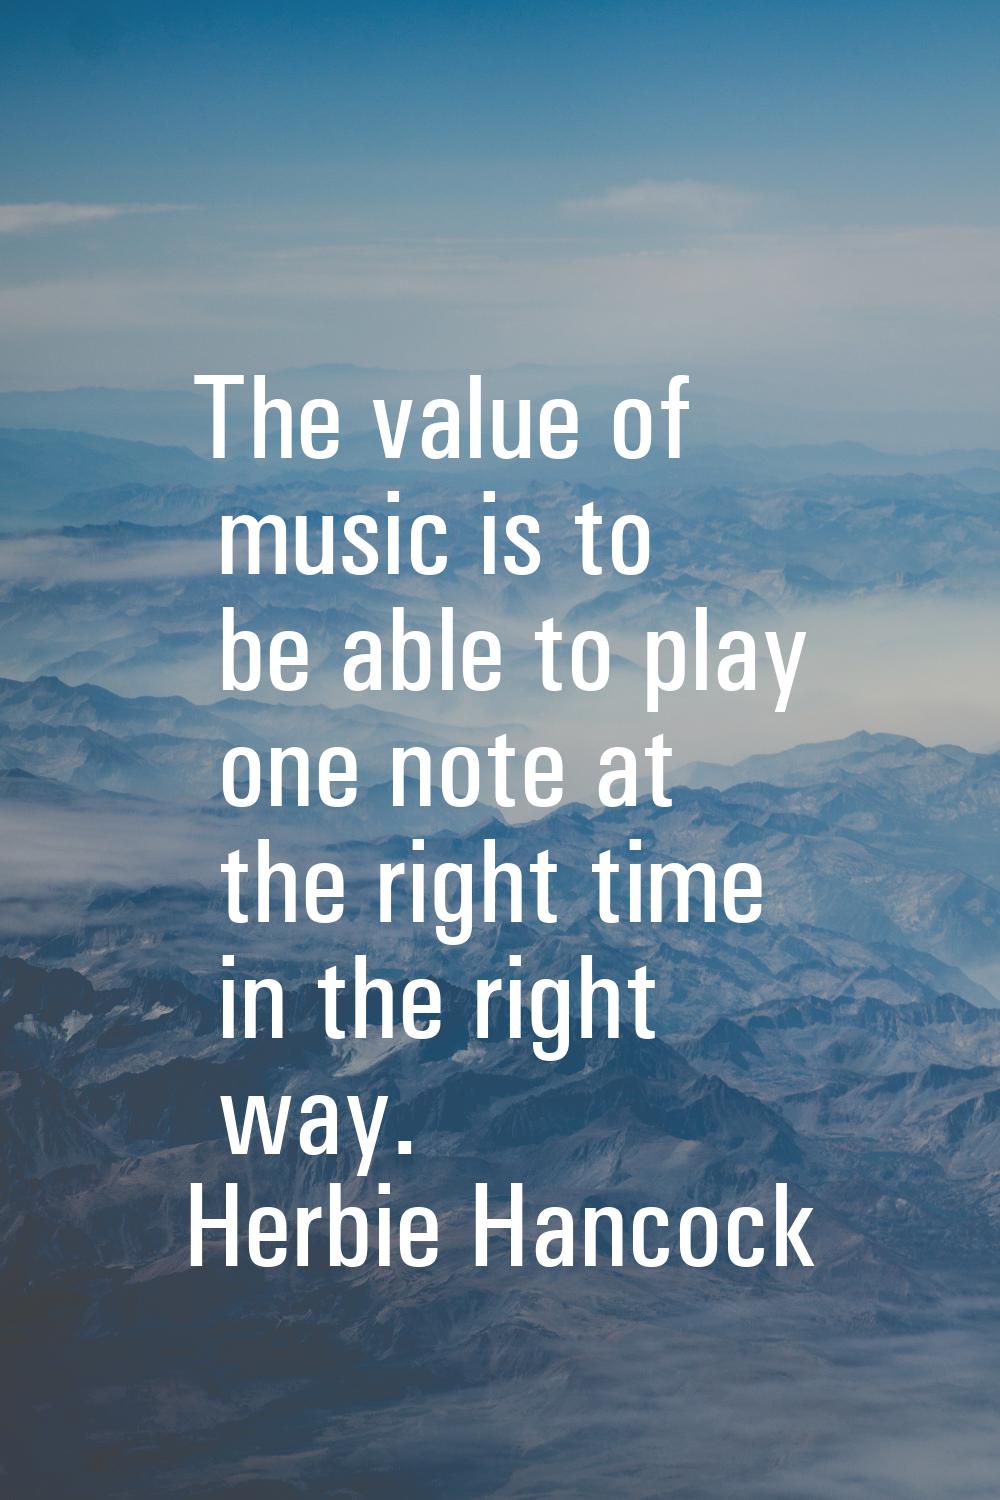 The value of music is to be able to play one note at the right time in the right way.